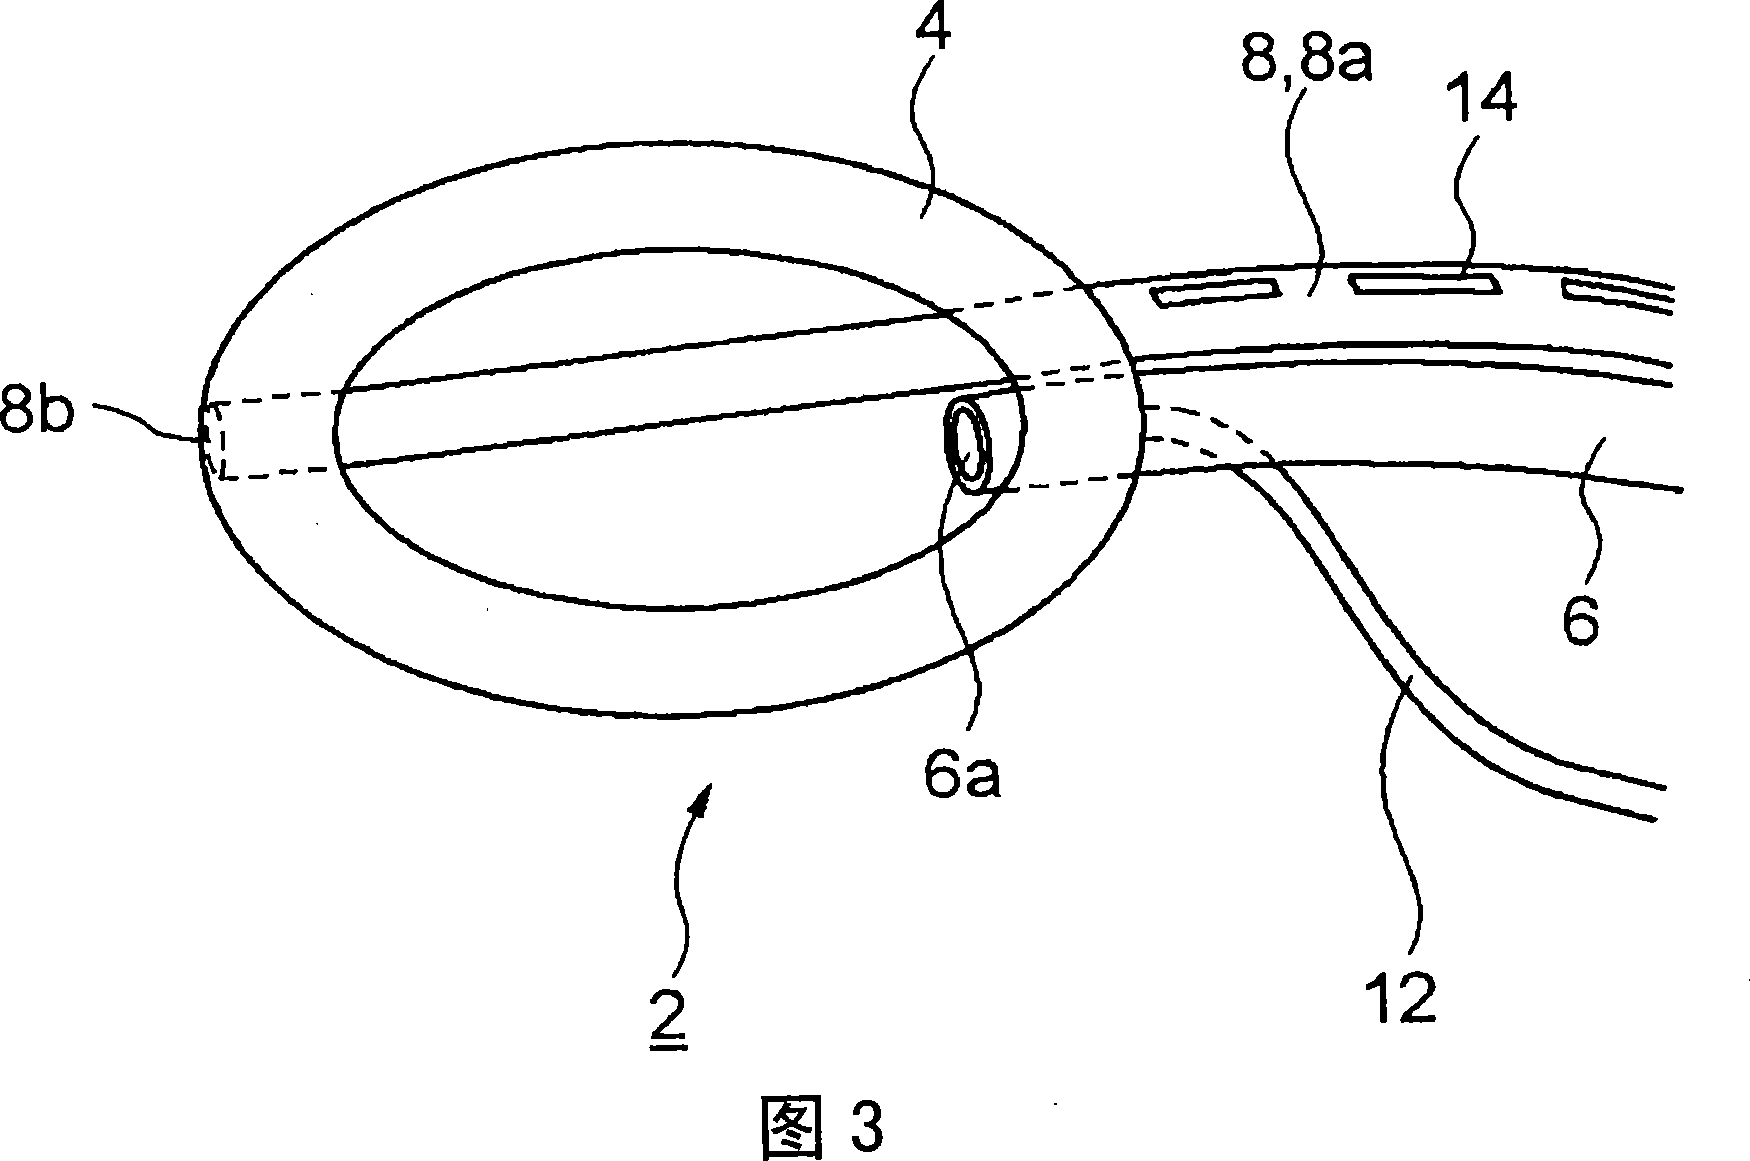 Laryngeal mask with guiding tube used for inserting stomach tube